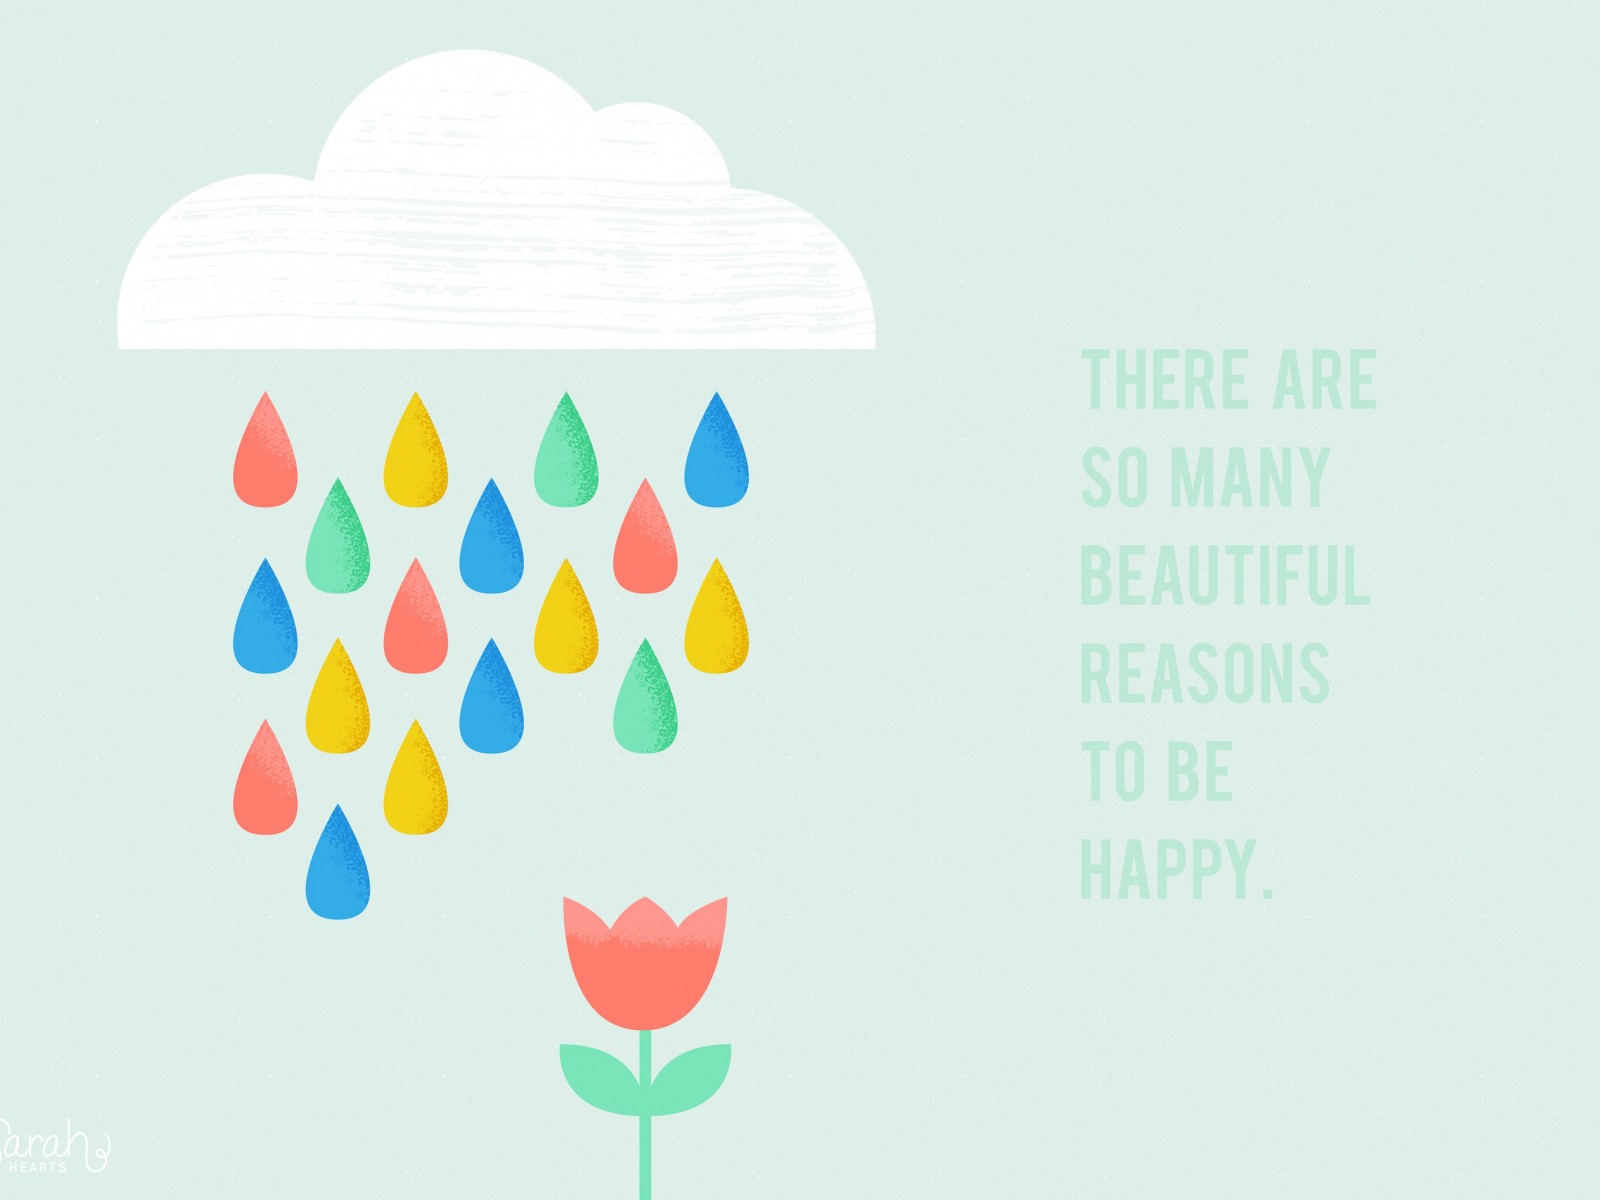 There are so many reasons to be happy Wallpaper for Desktop 1600x1200